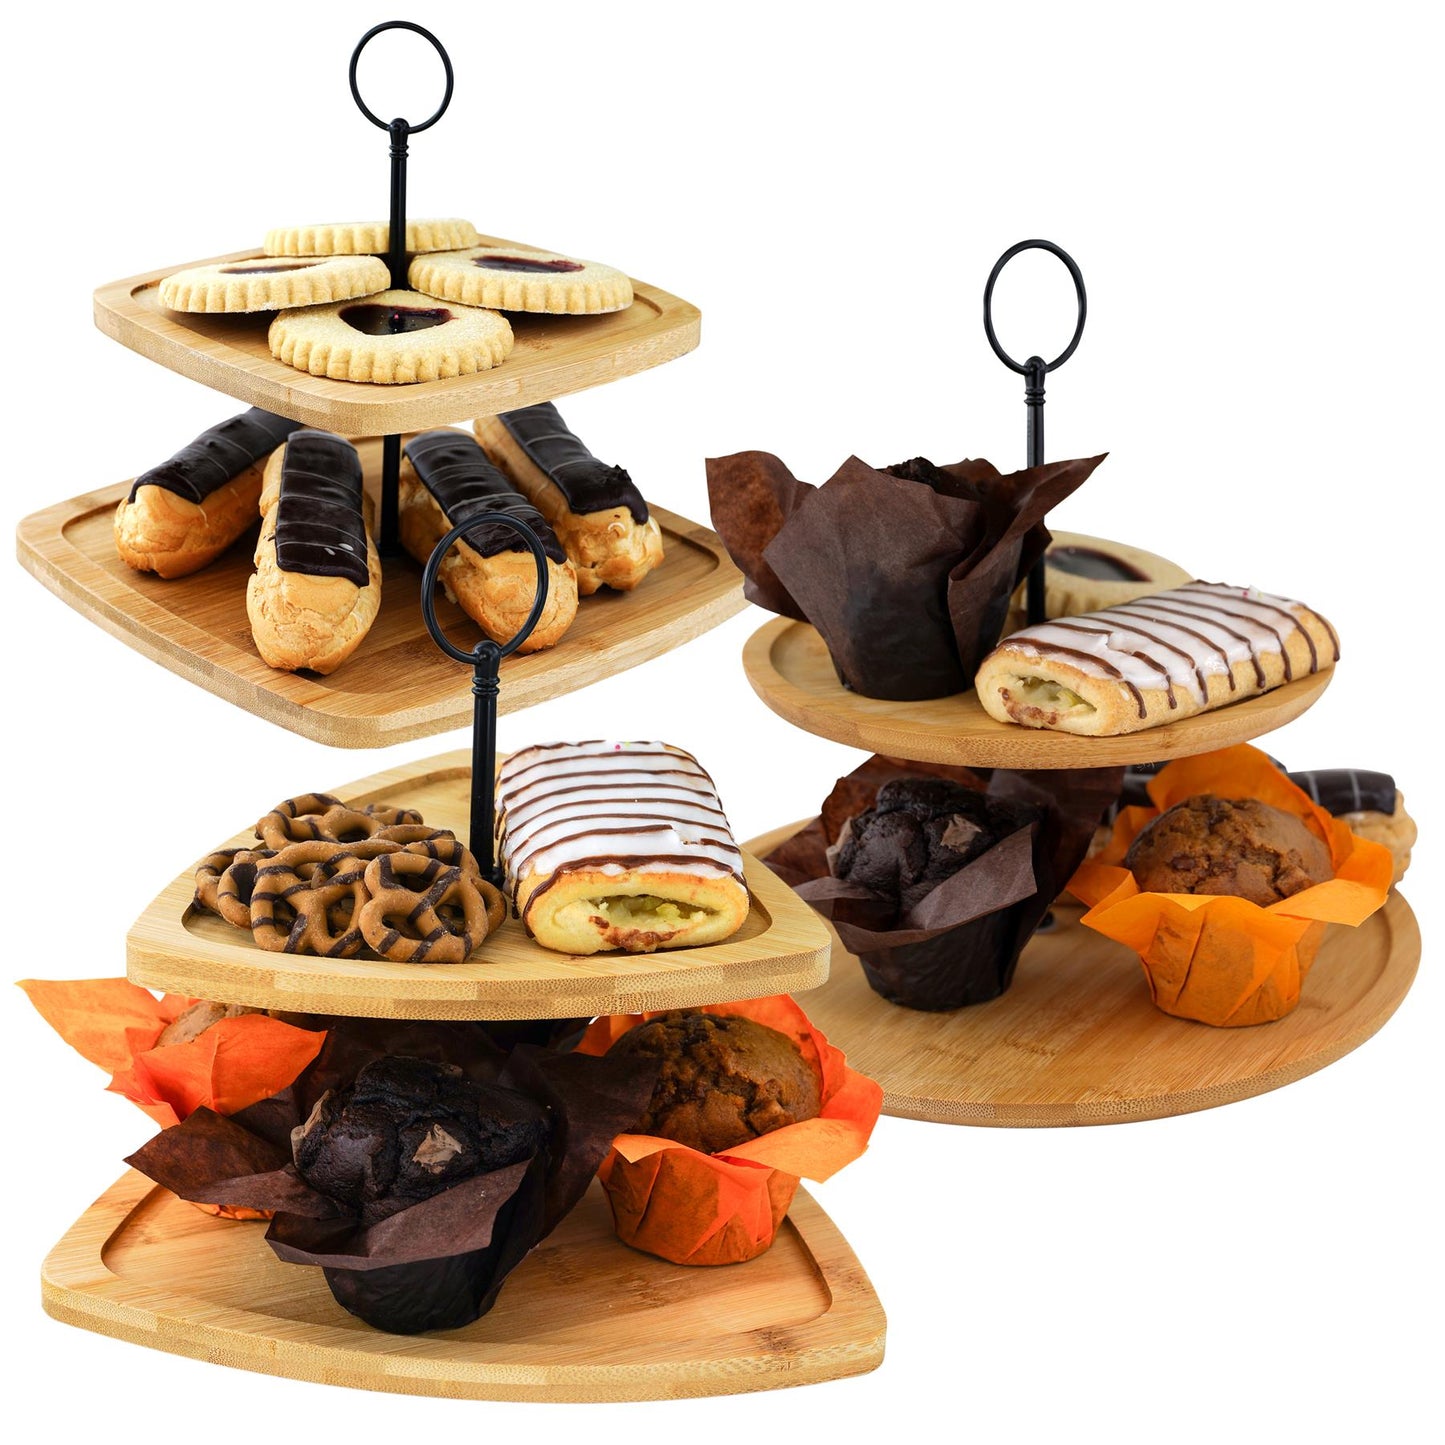 2 Tier Wooden Serving Stand by Geezy - UKBuyZone